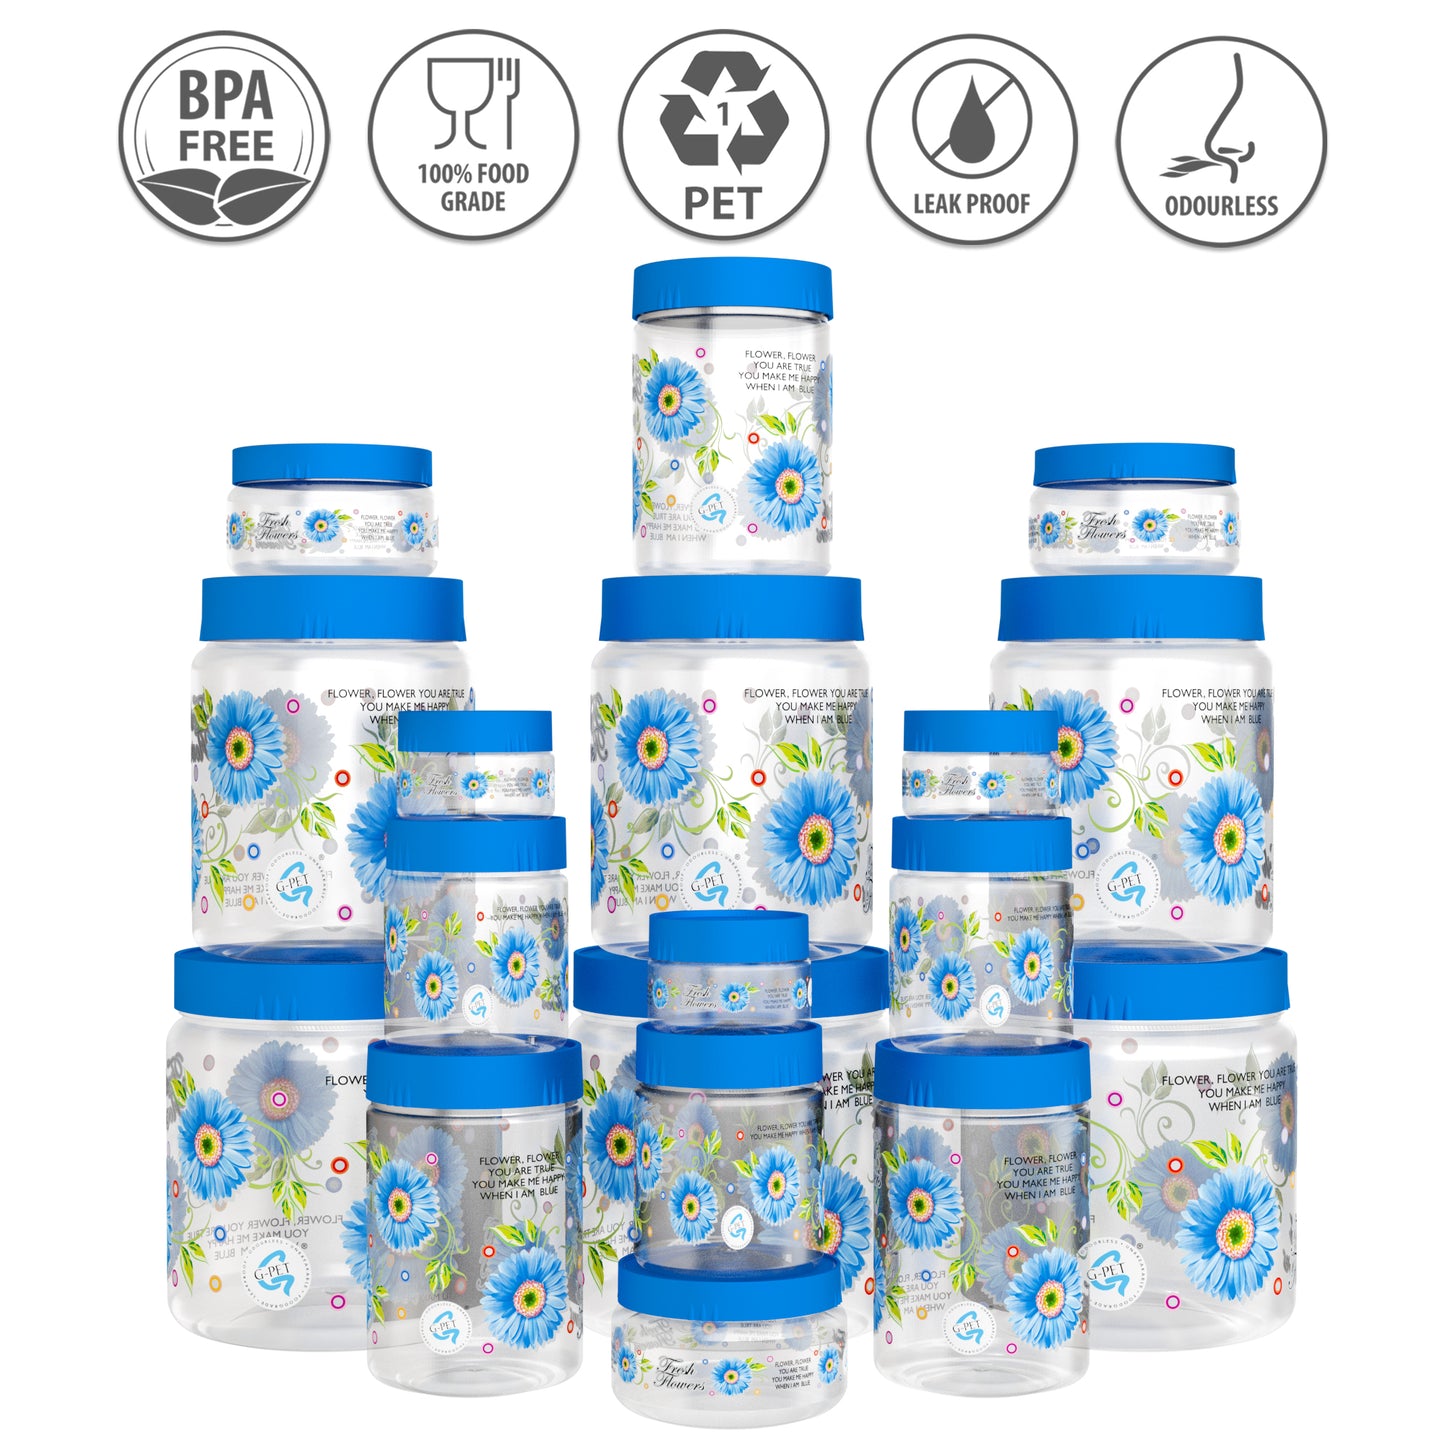 Print Magic Container Blue Pack of 18 - 1500ml (3 pcs), 1000ml (3 pcs), 450ml (3 pcs) 200ml (3 pcs), 50ml (6 pcs)